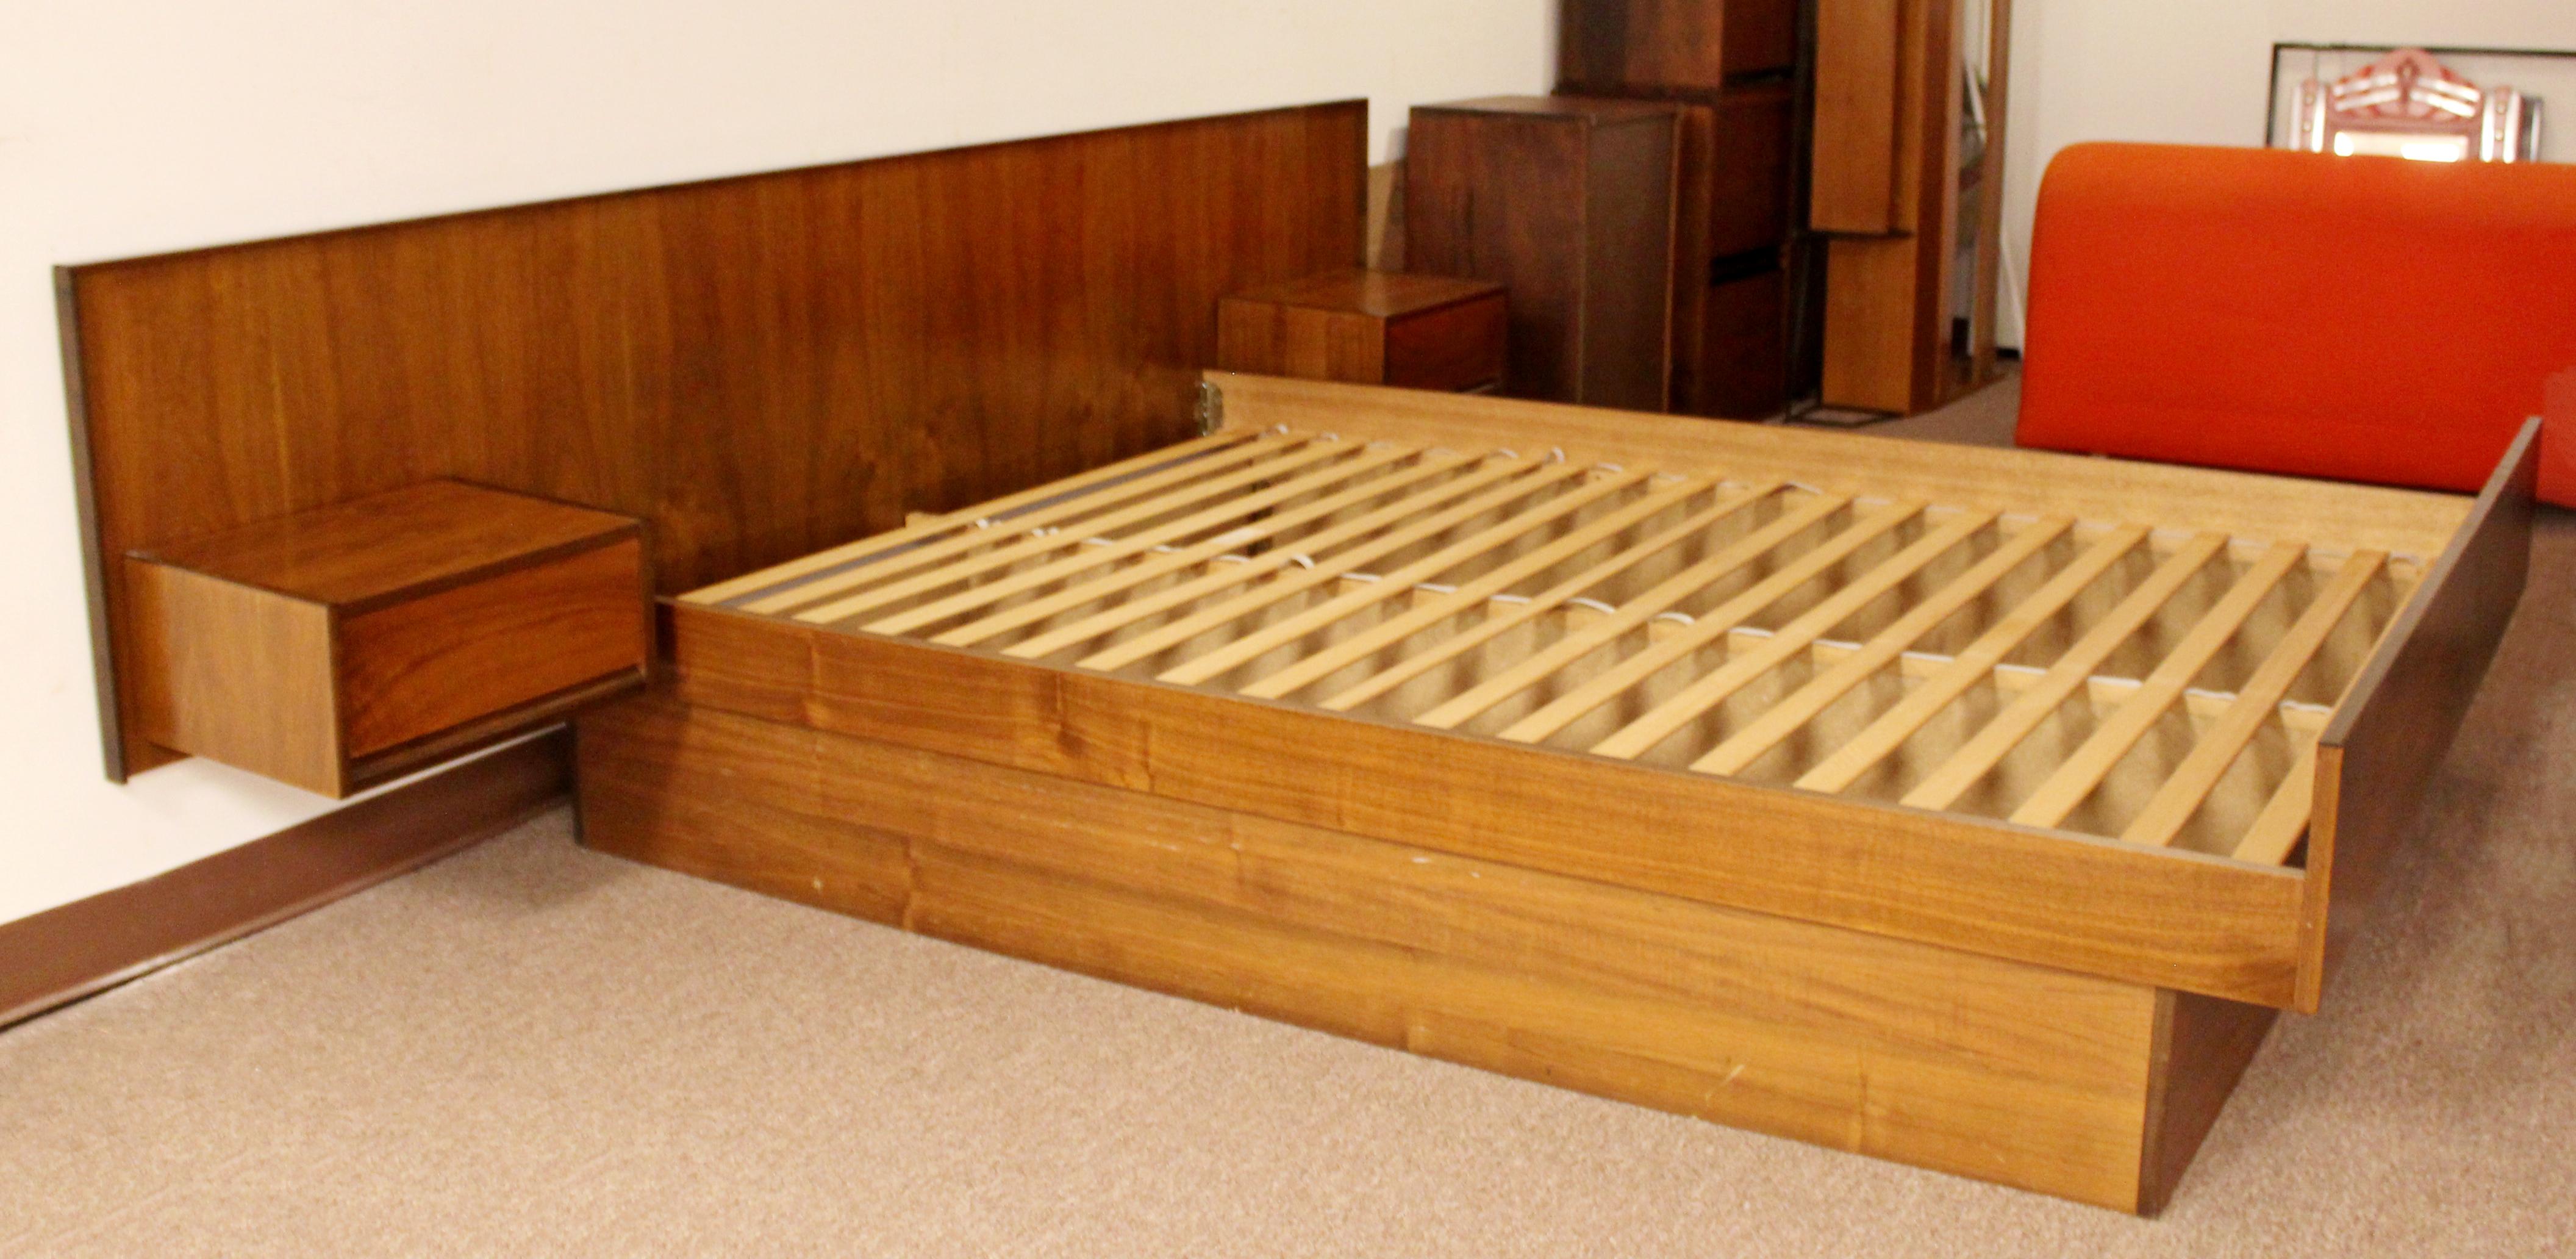 mid century modern bed with attached nightstands